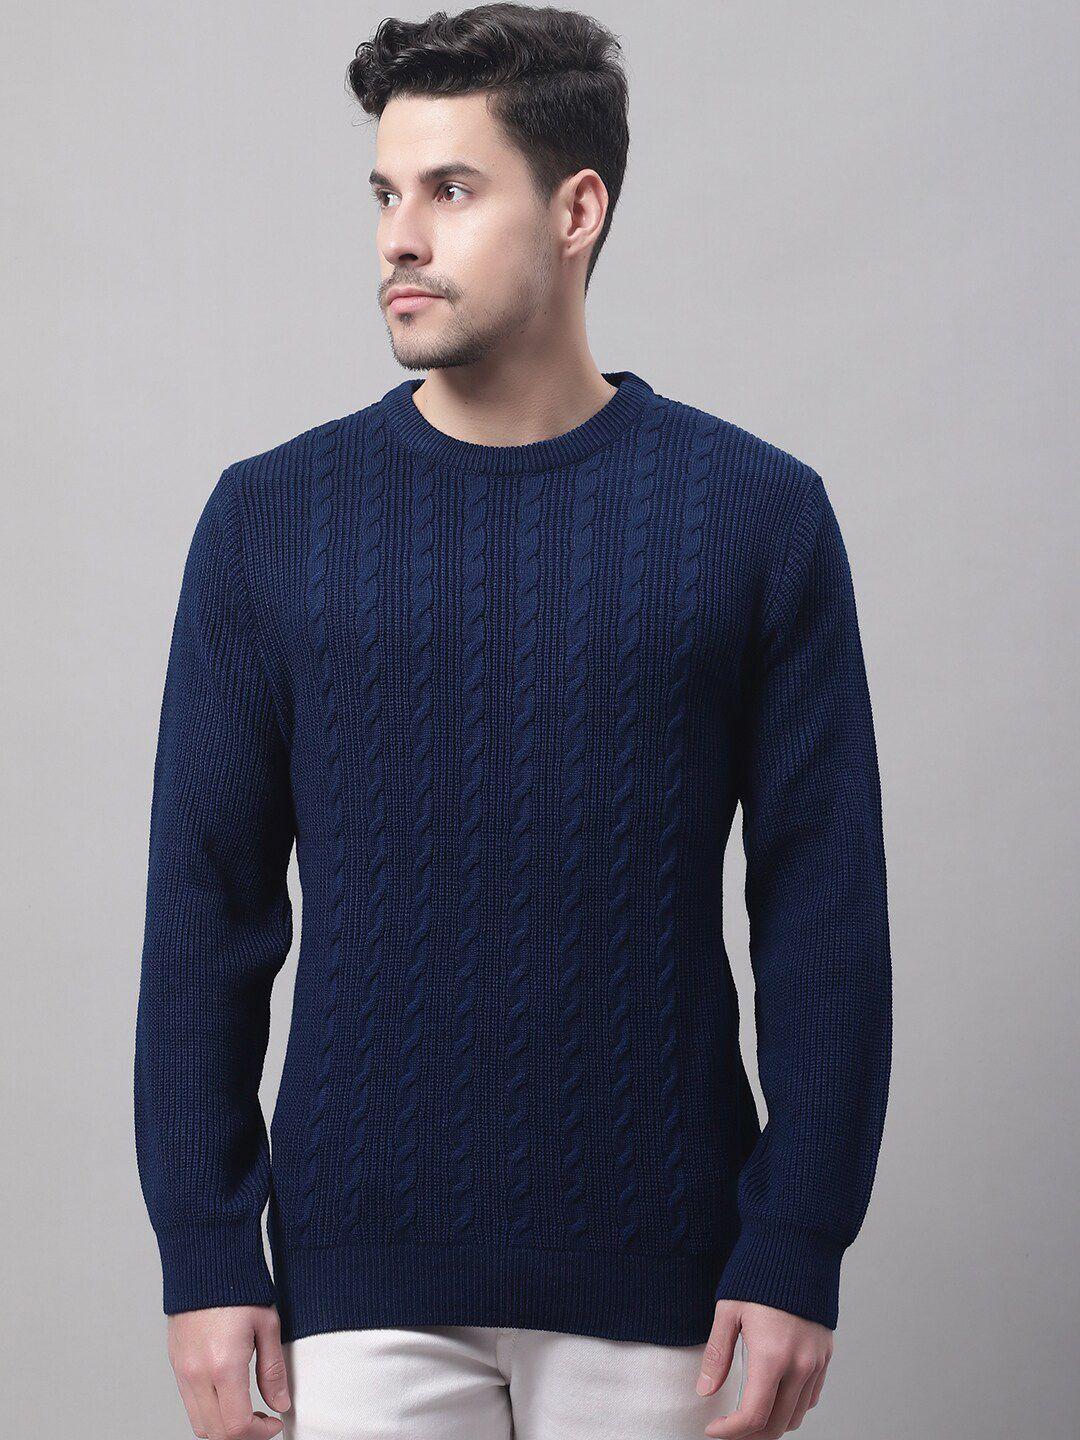 Cantabil Men Cable Knit Acrylic Pullover Sweater